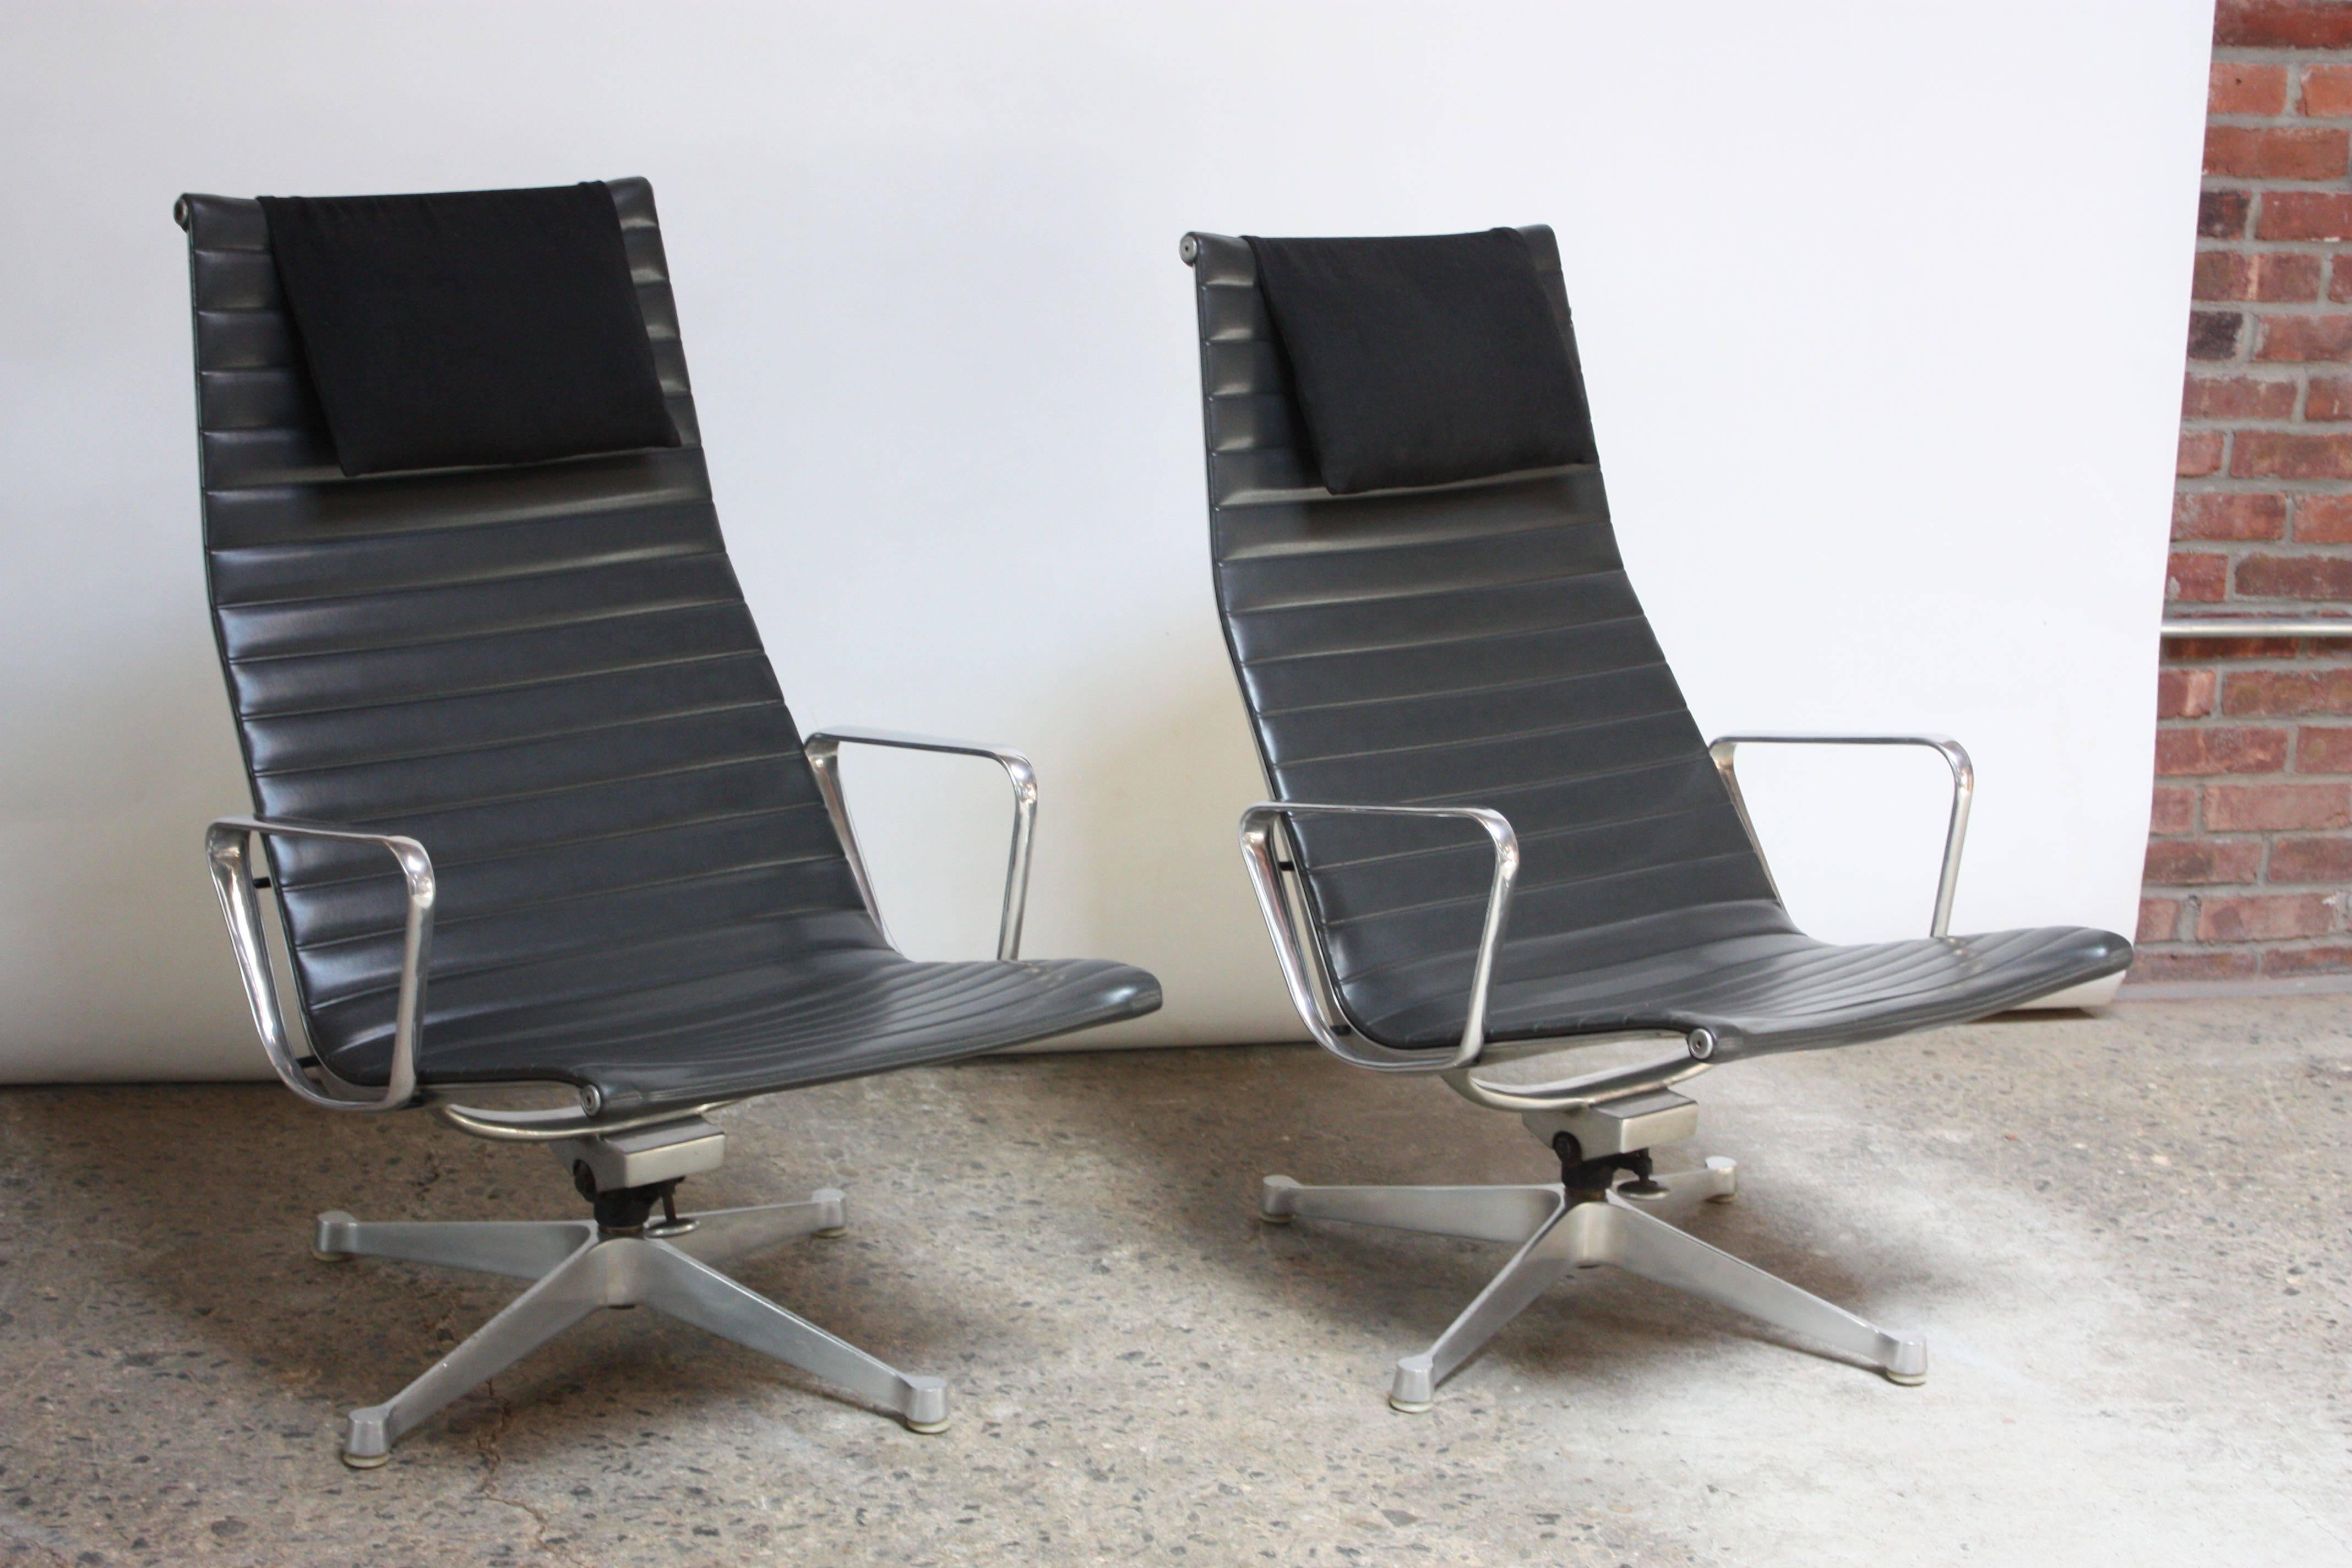 Early pair of high-back lounge chairs with swivel / tilt function designed by Charles and Ray Eames and manufactured by Herman Miller as part of the Aluminum Group collection. Composed of black channelled vinyl seats with headrests on four-point